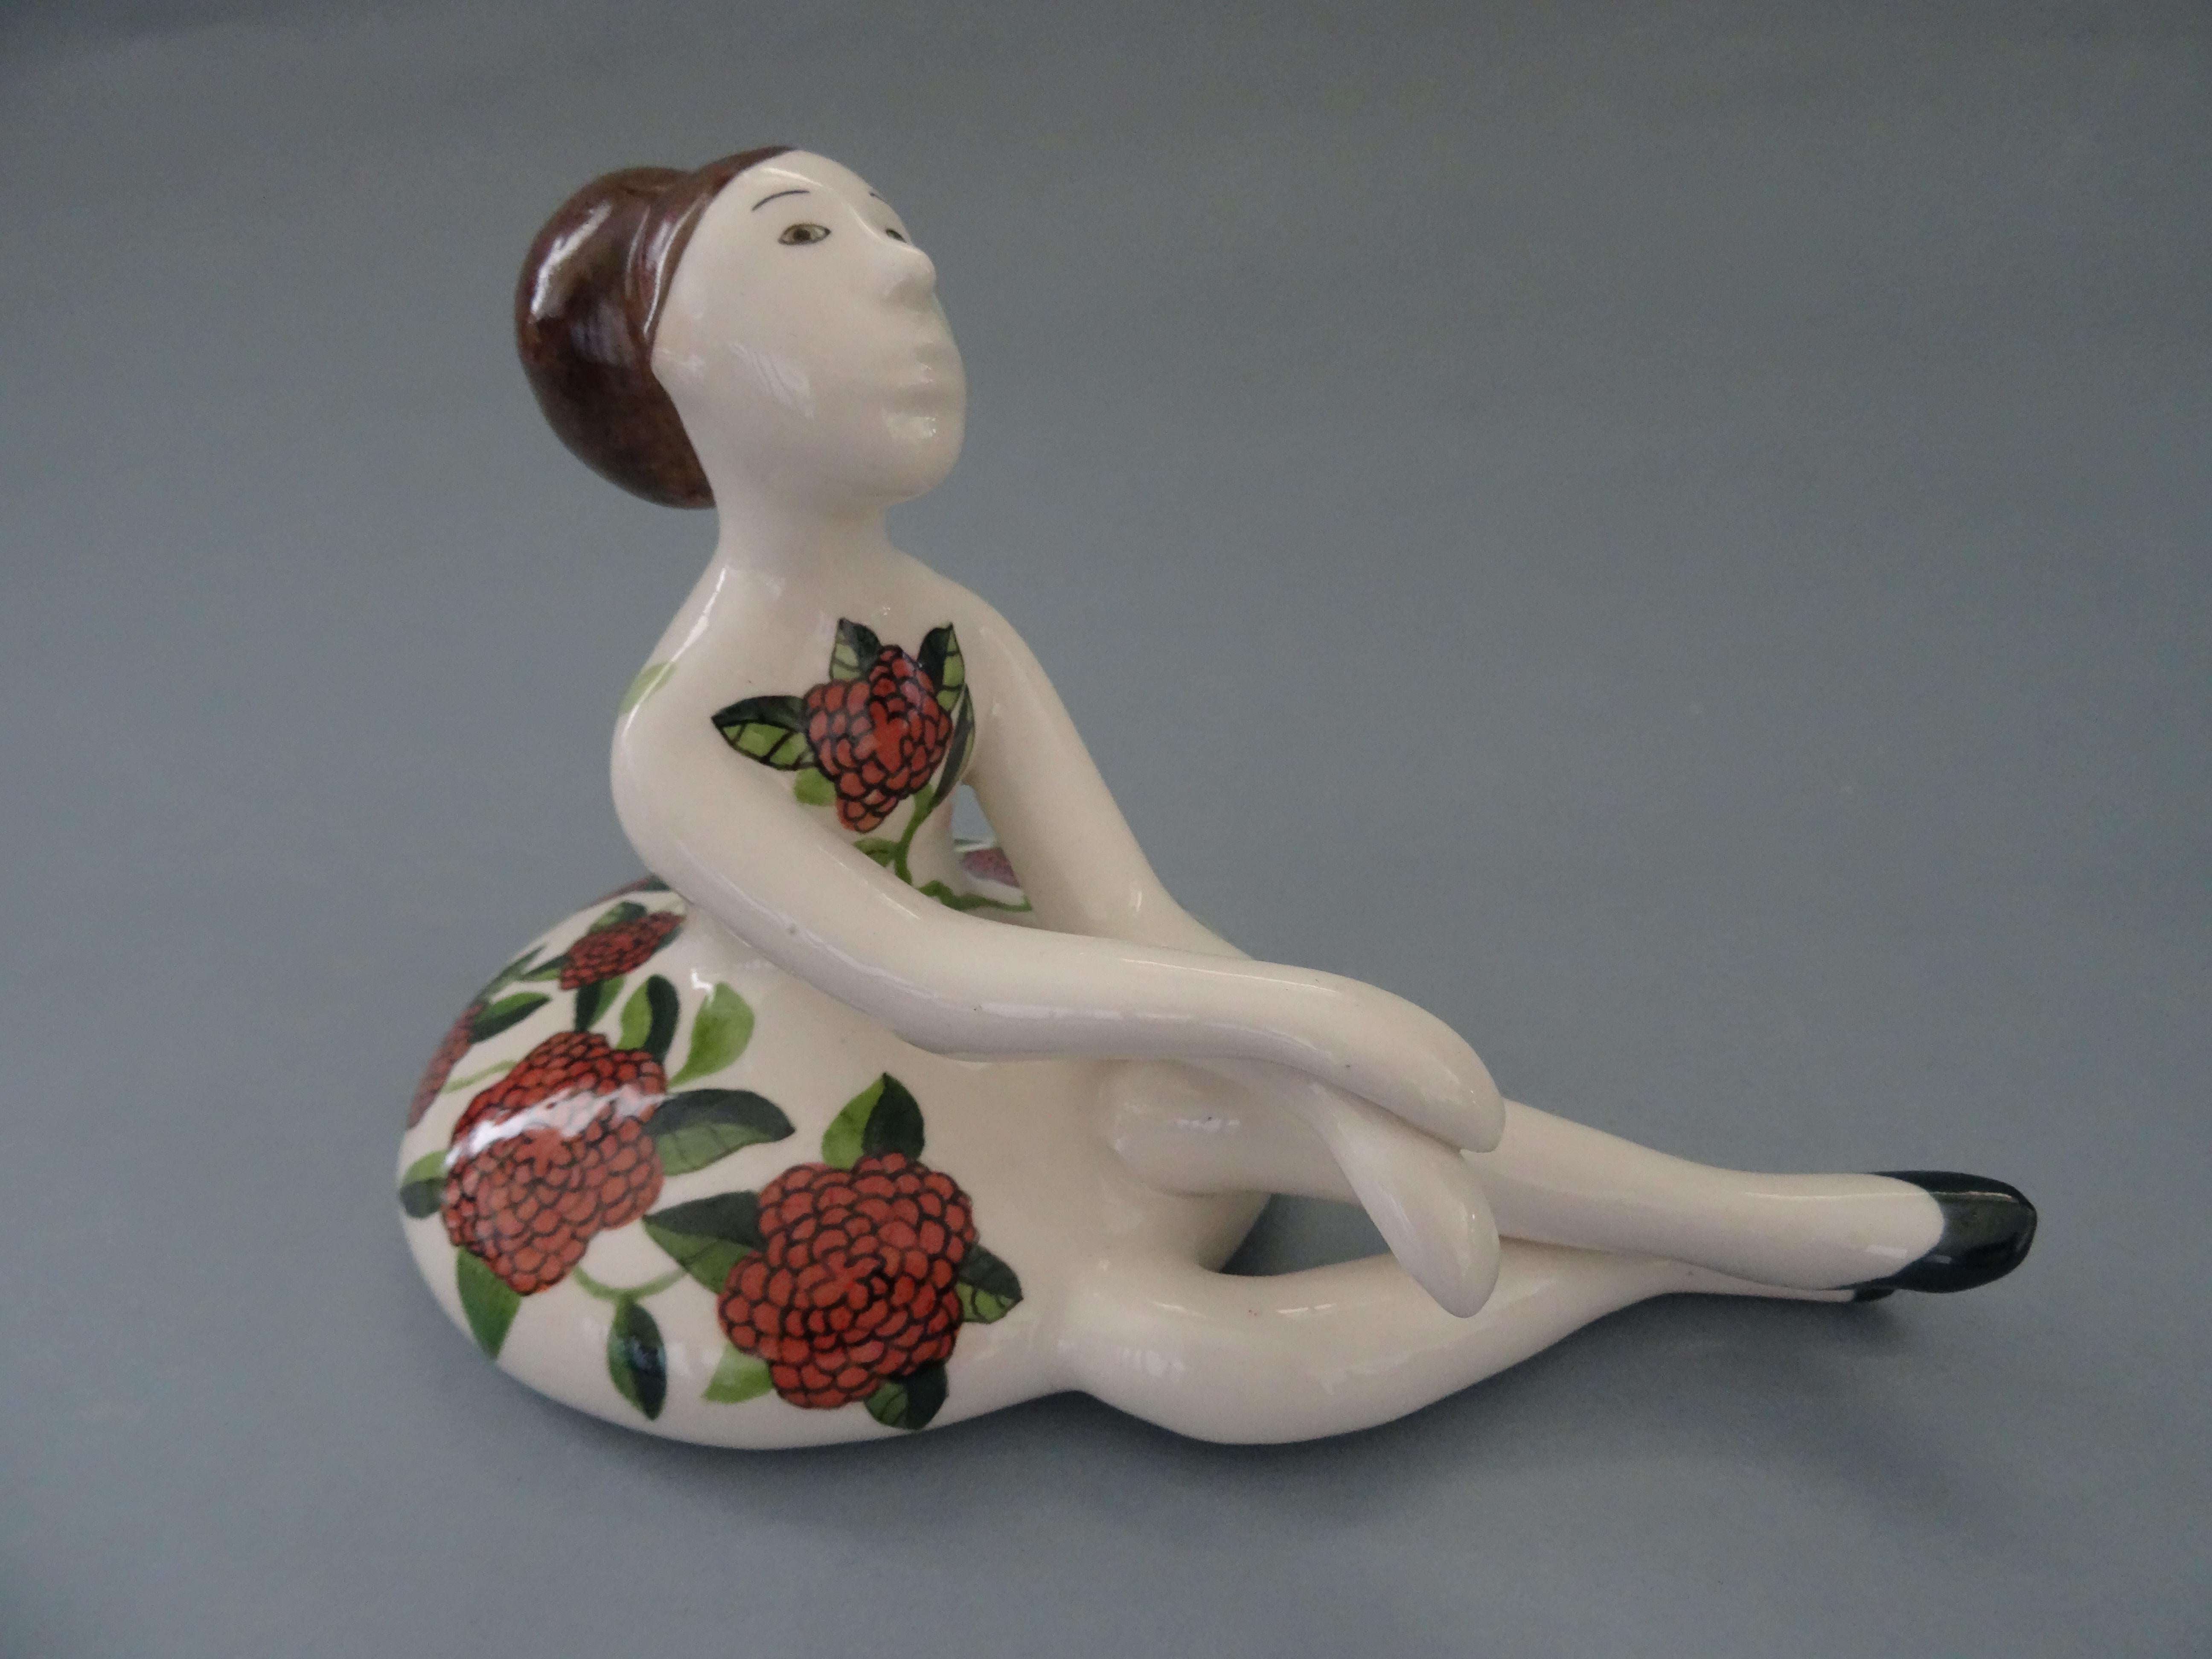 Ballerina 2015. Porcelain, 12x19 cm
(2 of 3)

The Ballerina figurine is a charming piece of porcelain art created in 2015. It features a sitting ballerina, gracefully poised and wearing a lovely flower dress. The ballerina is depicted in a relaxed